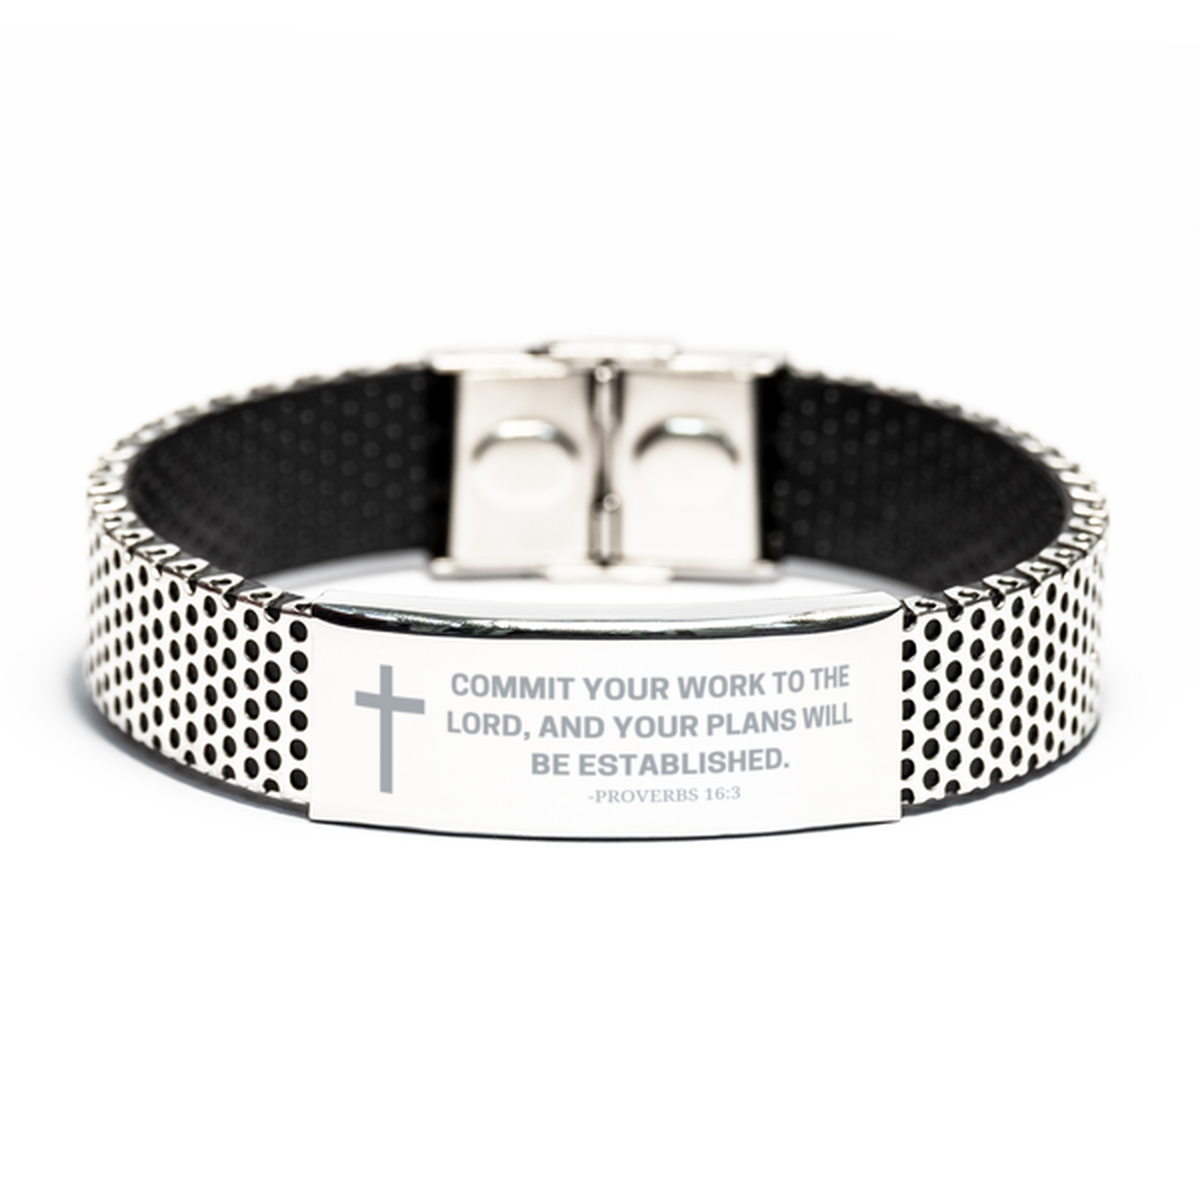 Baptism Gifts For Teenage Boys Girls, Christian Bible Verse Stainless Steel Bracelet, Commit your work to the Lord, Catholic Confirmation Gifts for Son, Godson, Grandson, Nephew